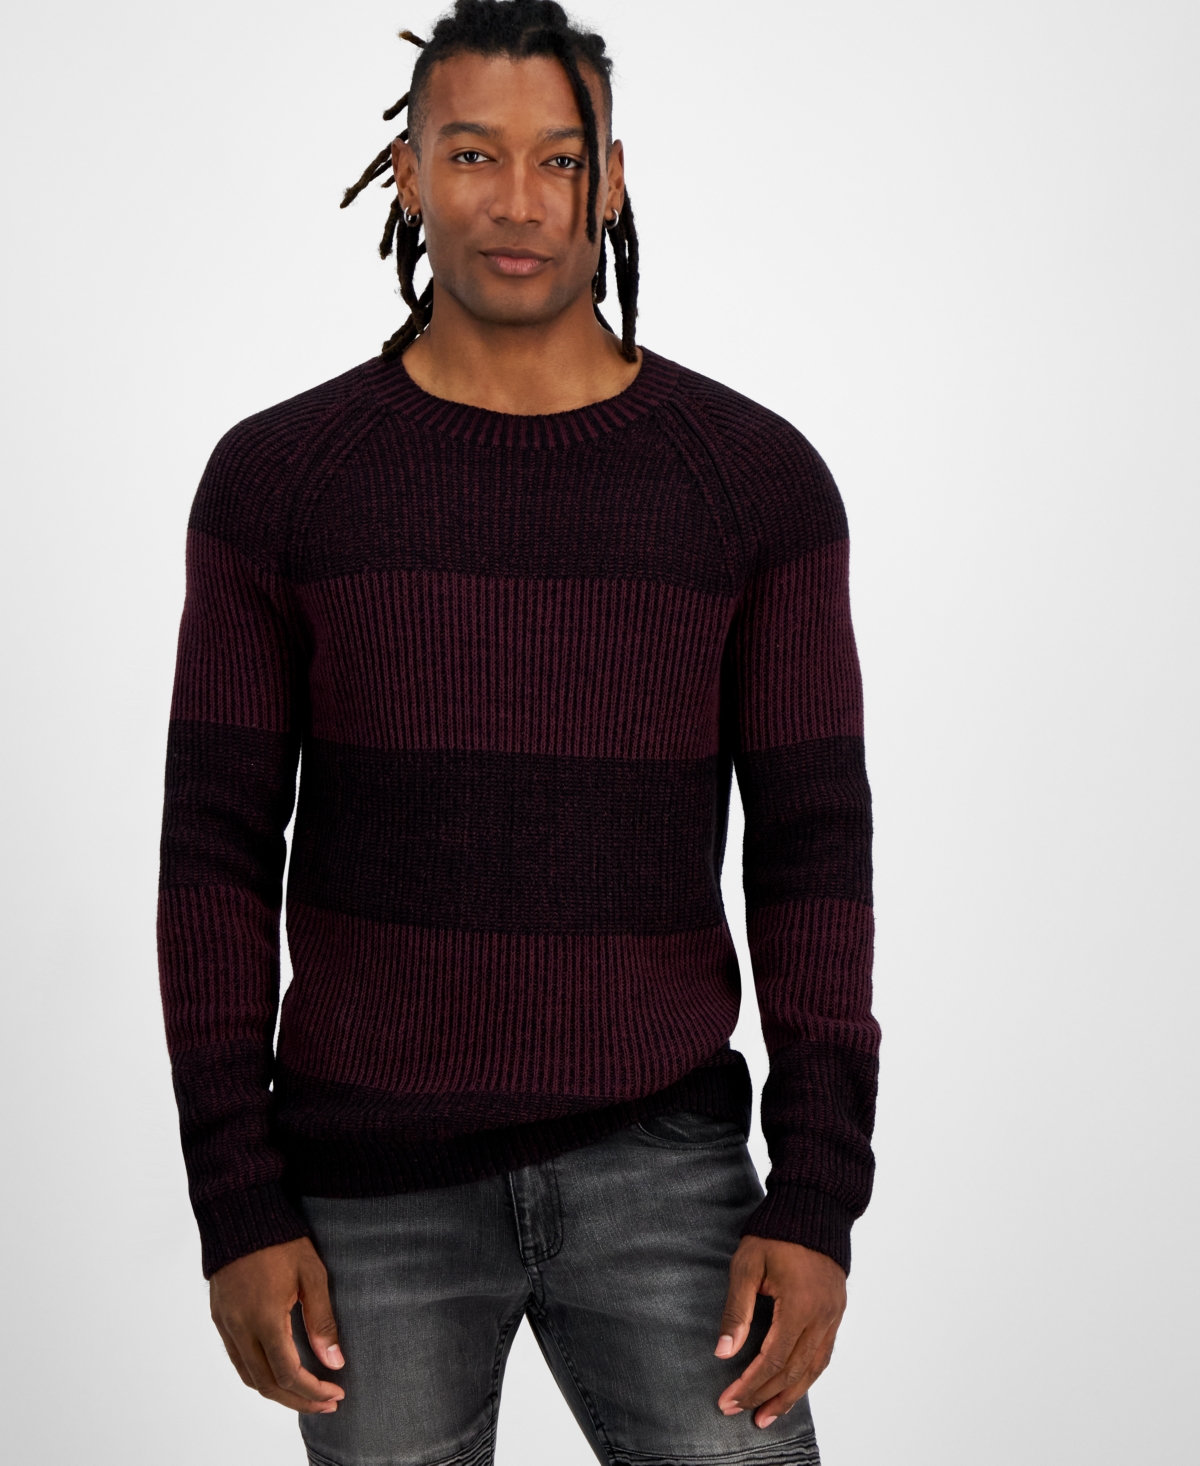 Men's Plaited Crewneck Sweater, Created for Macy's - Antique White